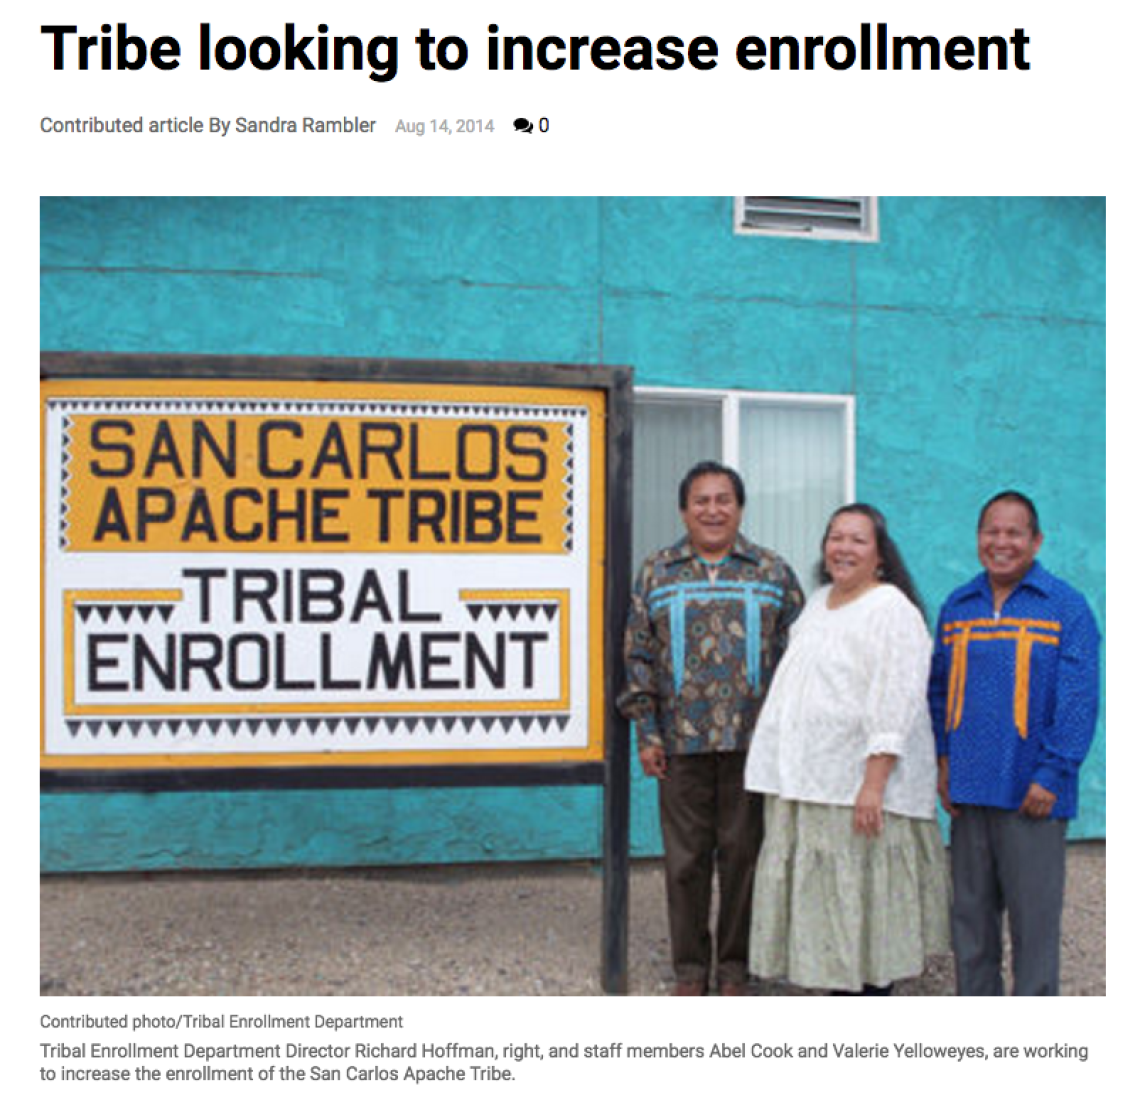 Tribe looking to increase enrollment